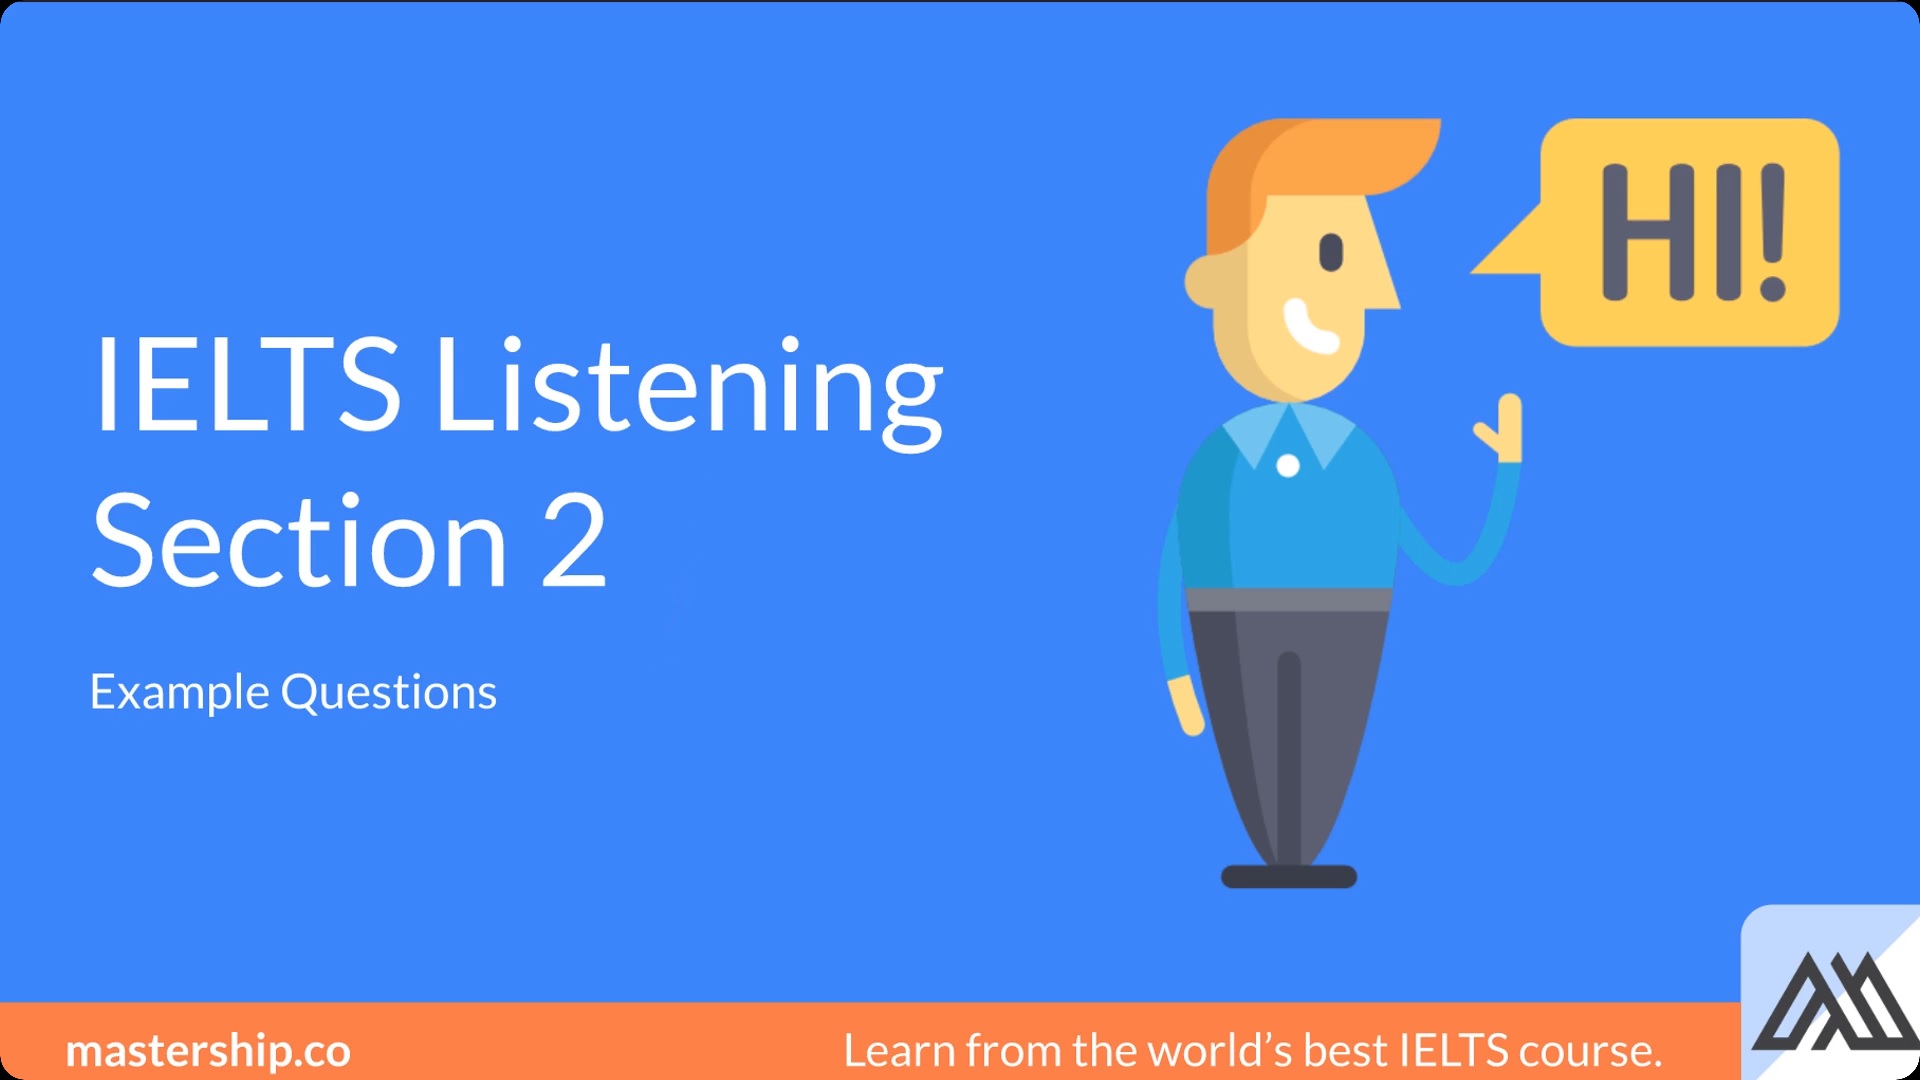 How to answer Section 2 of IELTS listening test